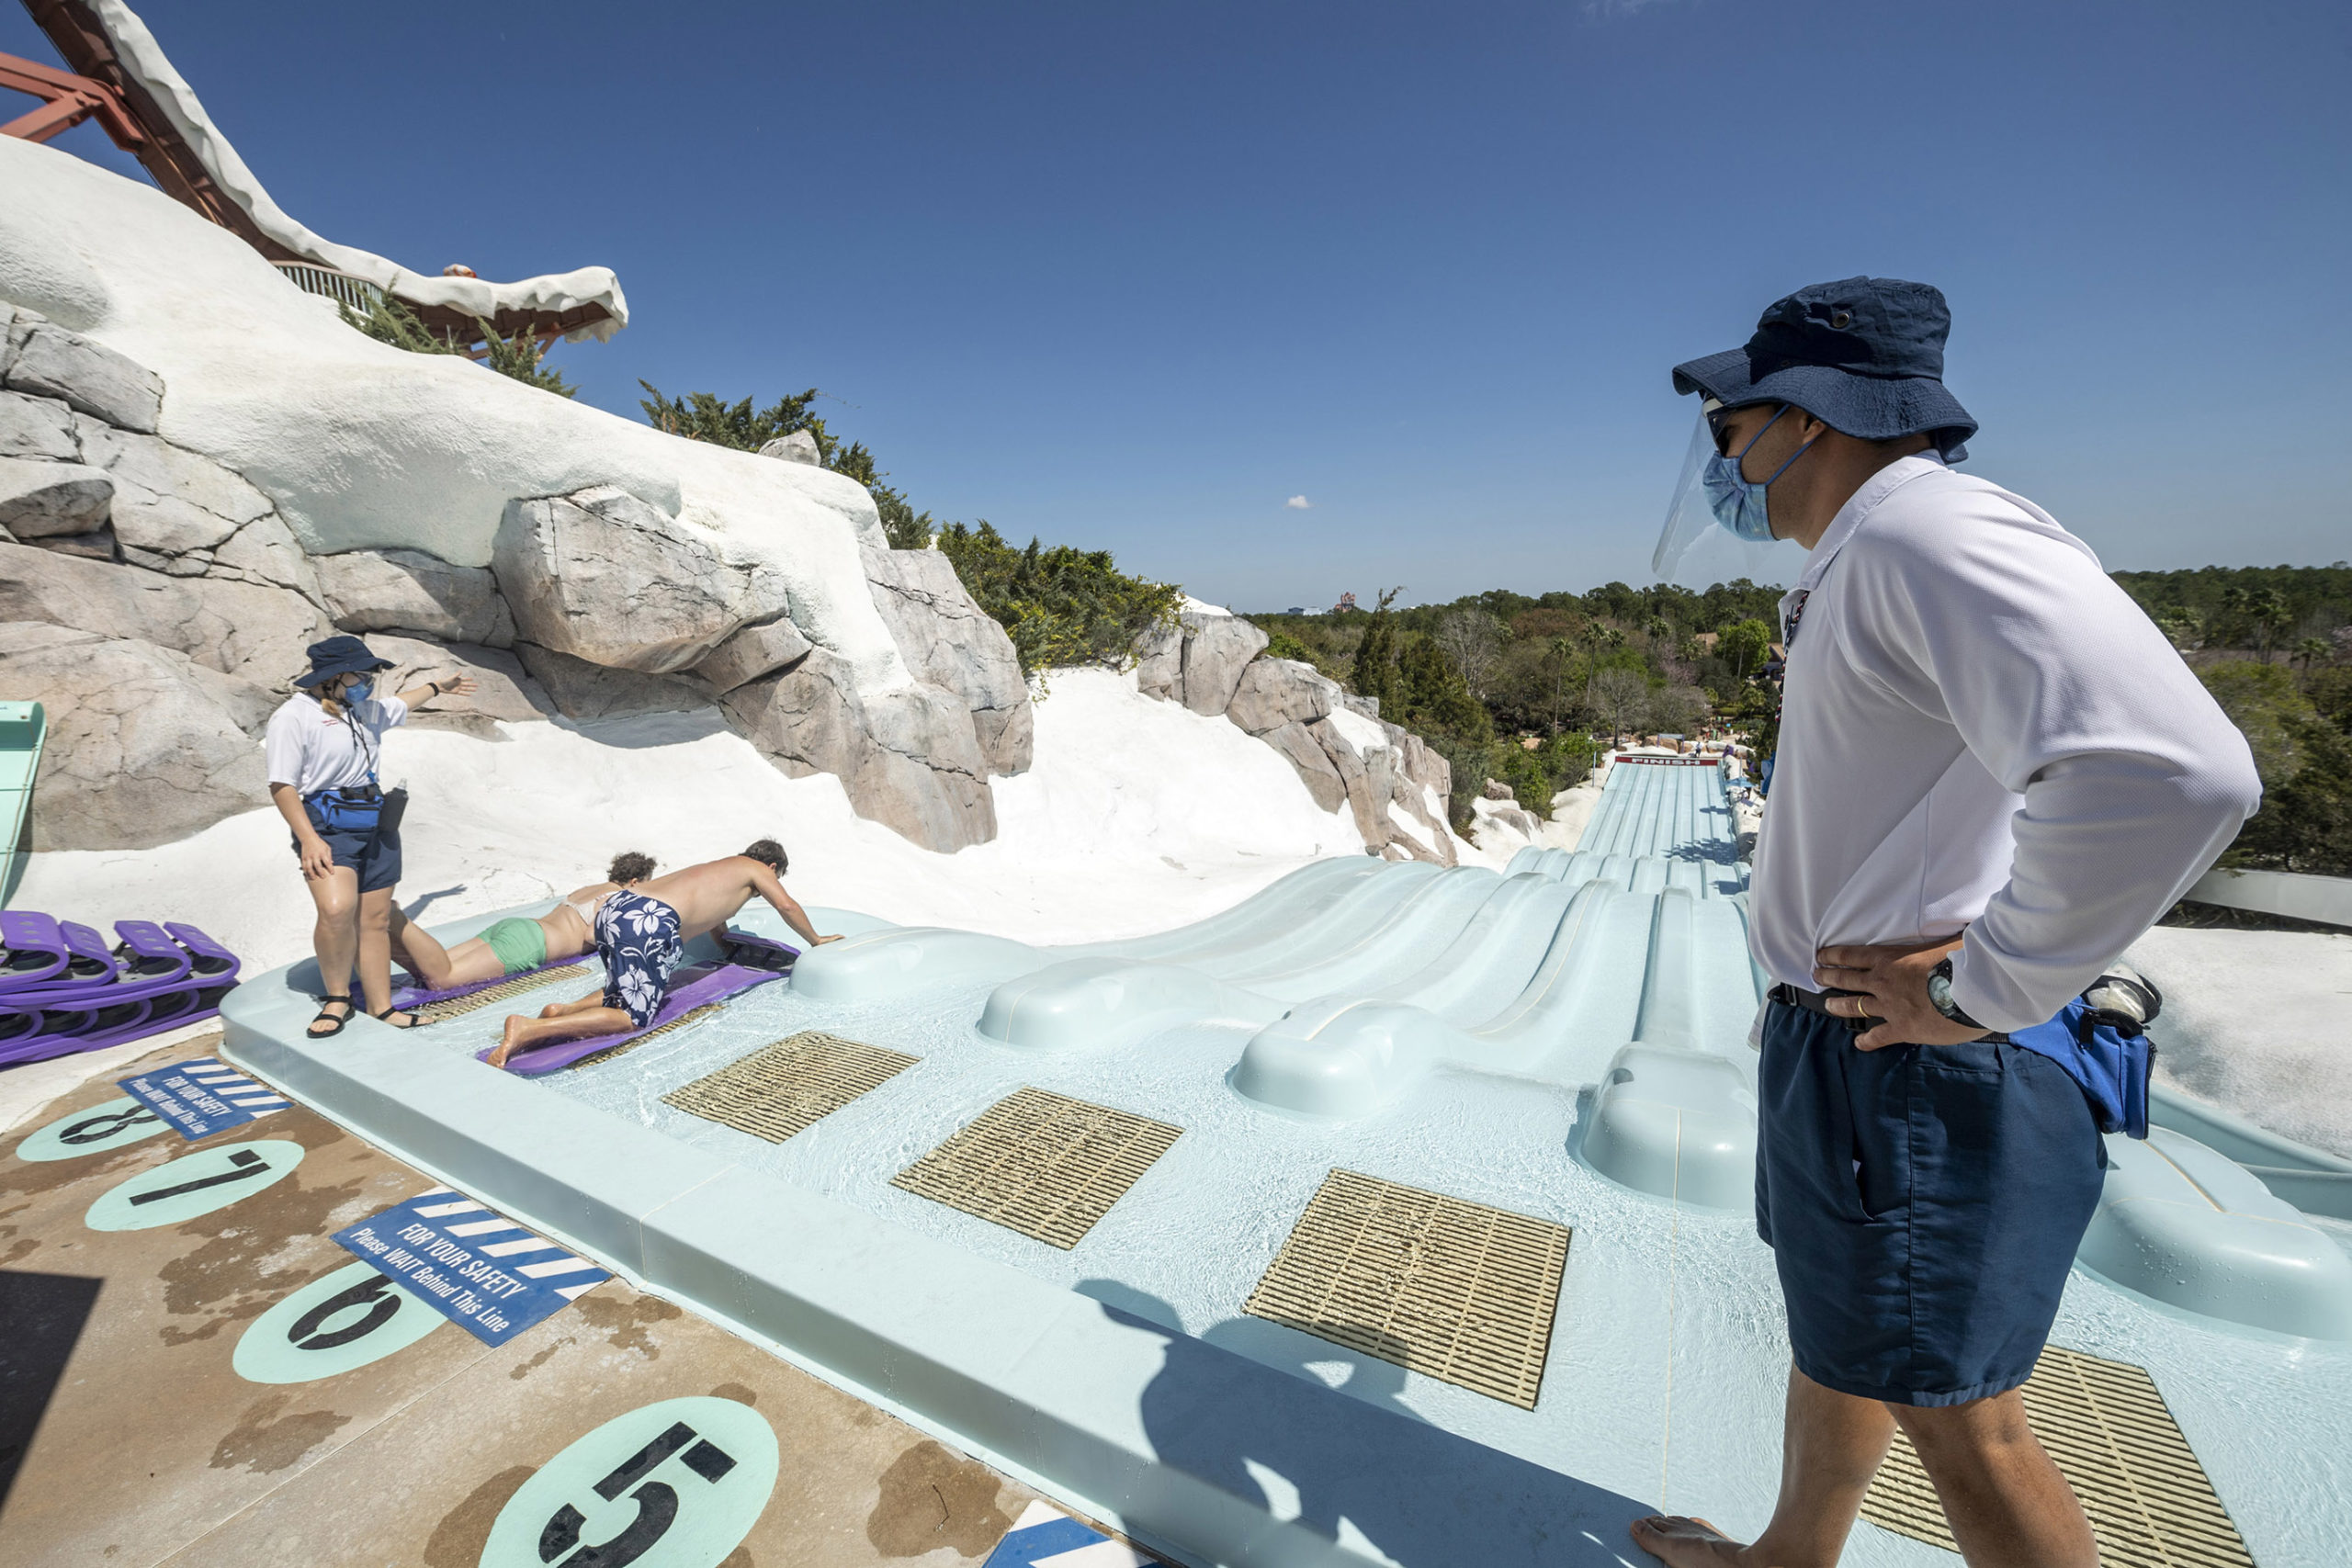 Blizzard Beach reopening from COVID shutdown